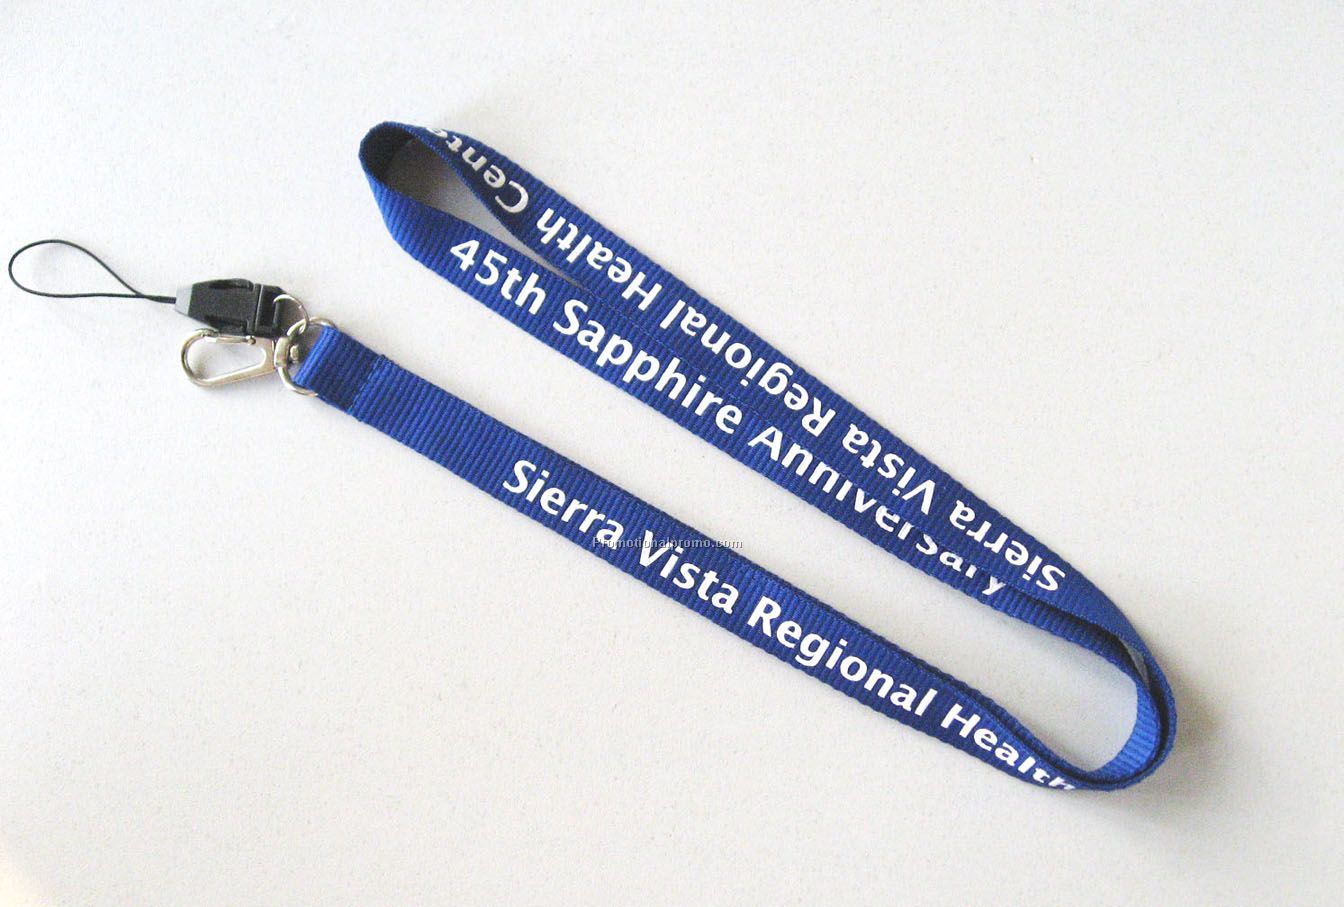 Lanyard with carabiner and mobile phone hanger